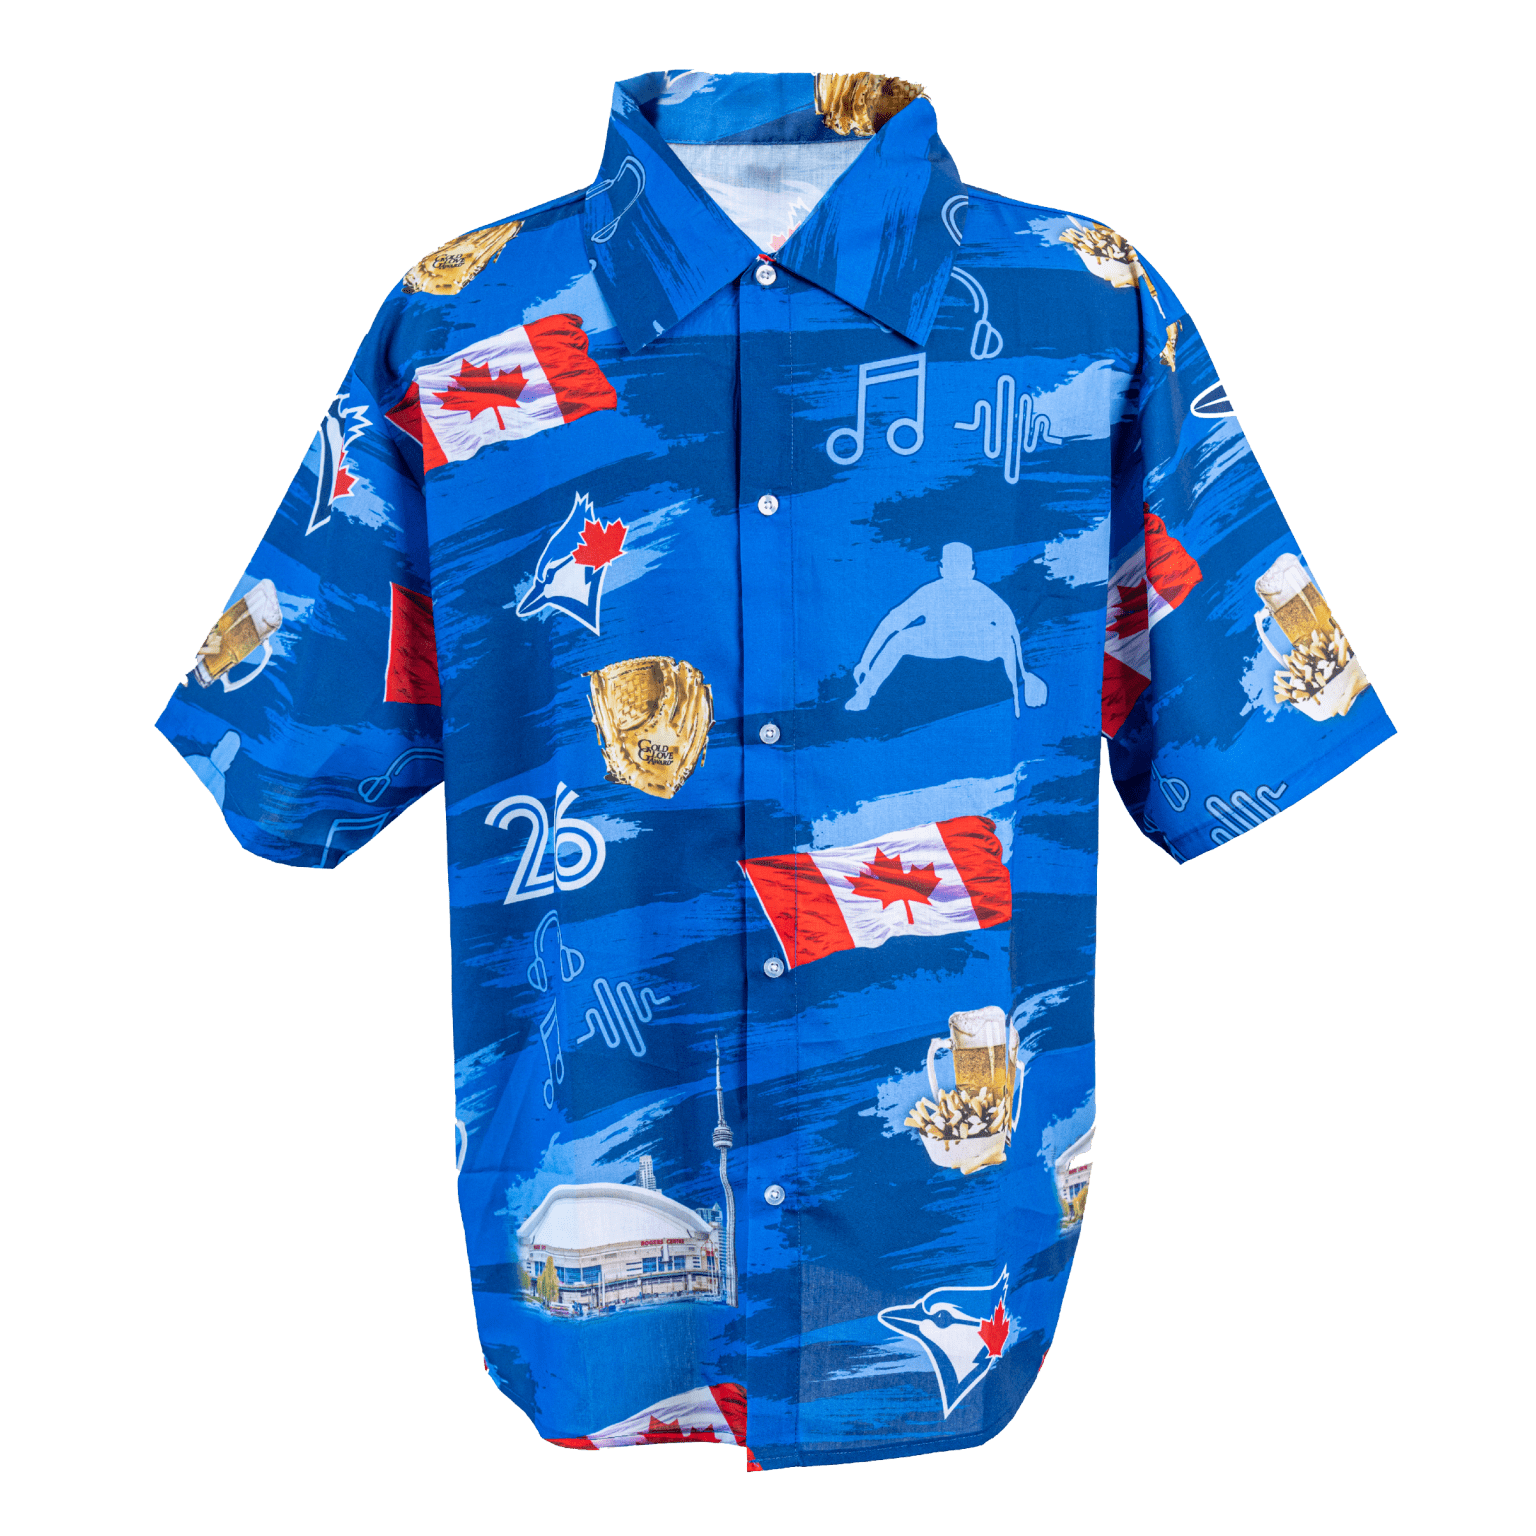 jays jersey giveaway